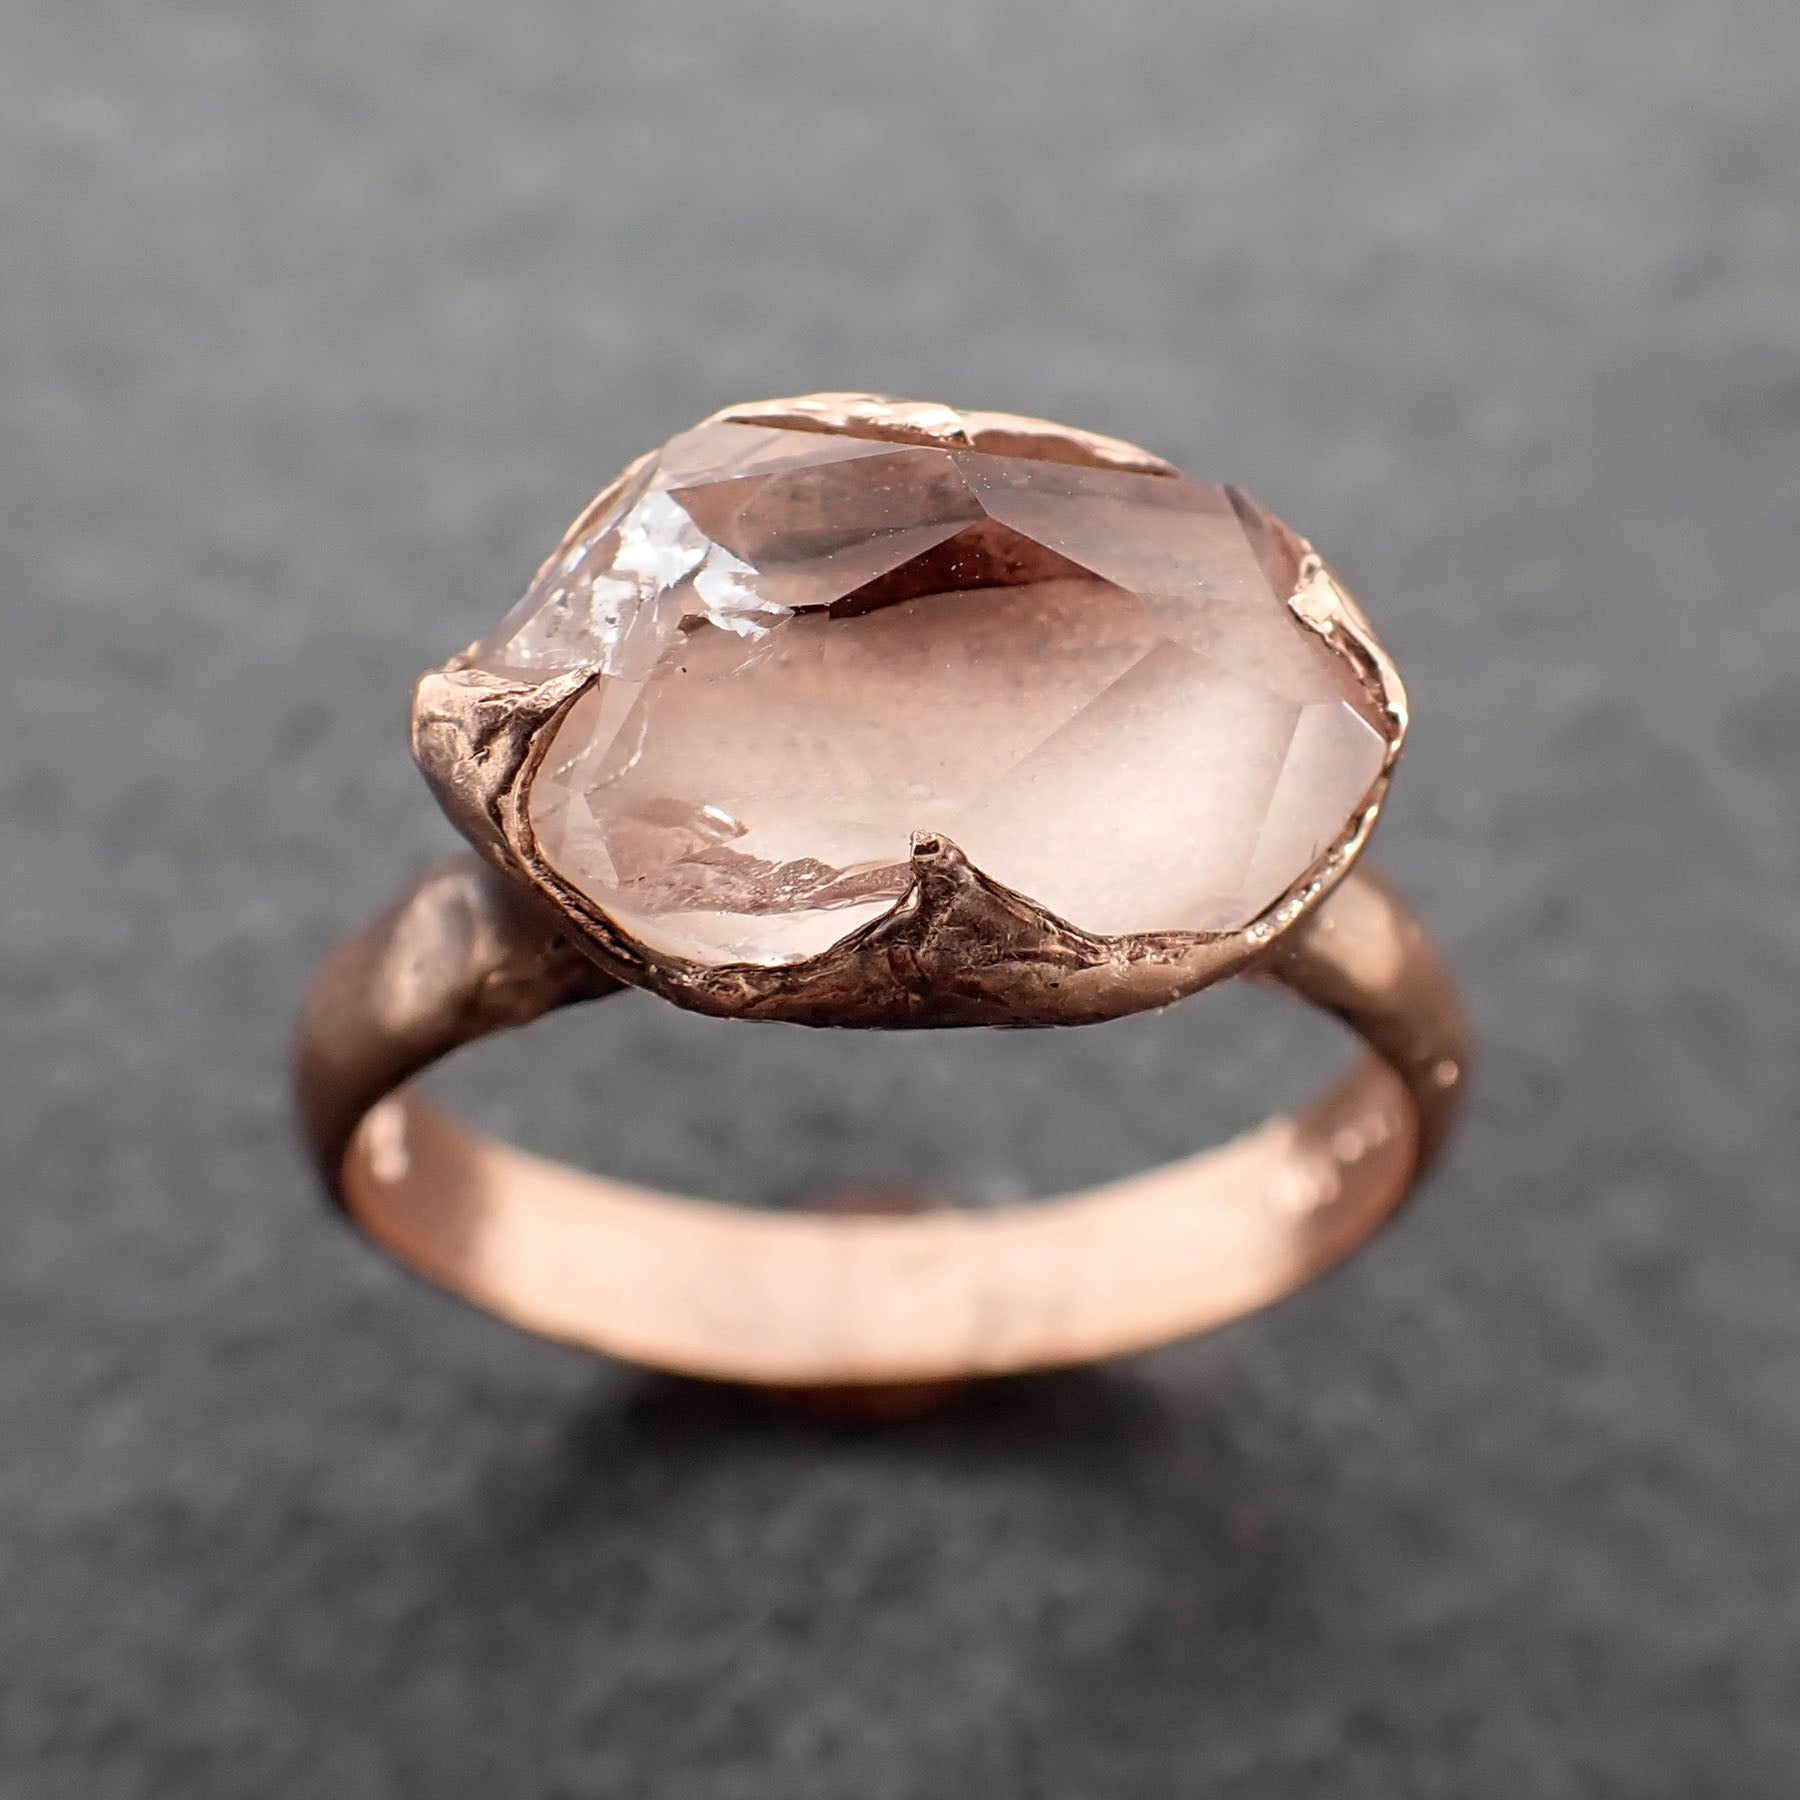 Morganite partially faceted 14k Rose gold solitaire Pink Gemstone Cocktail Ring Statement Ring gemstone Jewelry by Angeline 2400